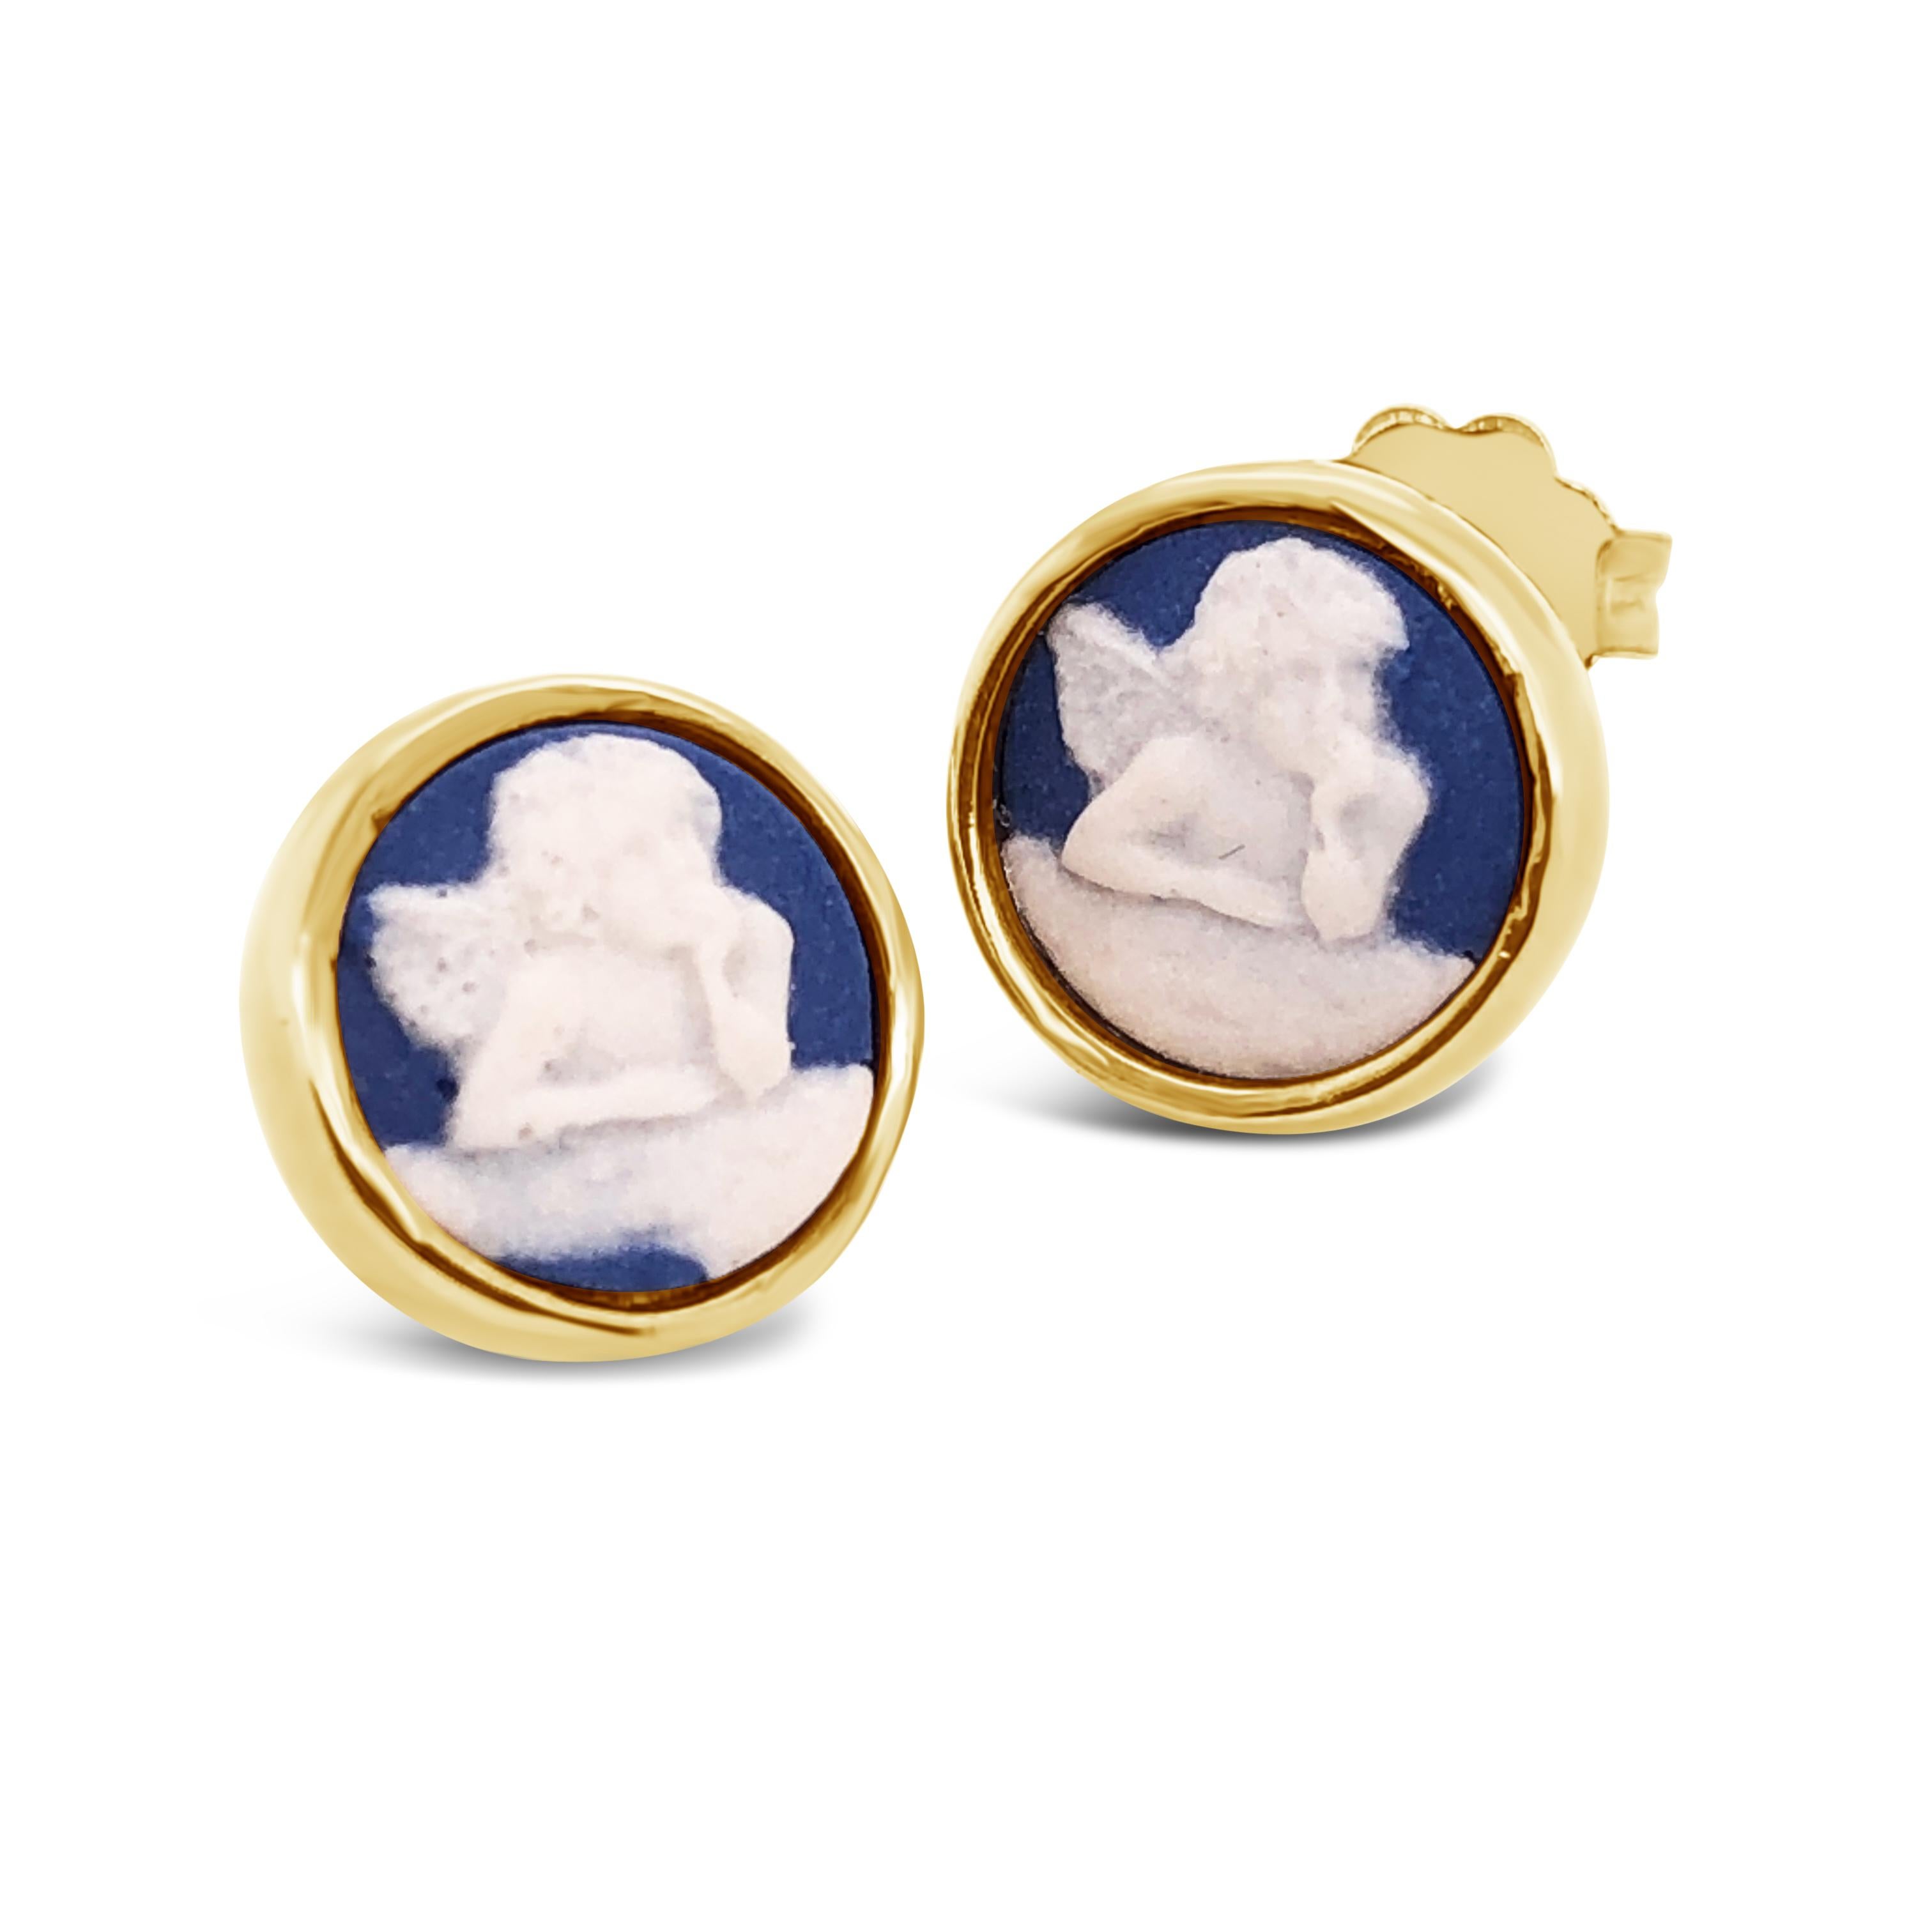 Beautifully hand crafted porcelain cameo earrings mounted in 18k gold plated sterling silver. With a sweet look these stud earrings depict two little cherubs, one of the most classic subject of cameo making. In times past, cameos were mainly made of